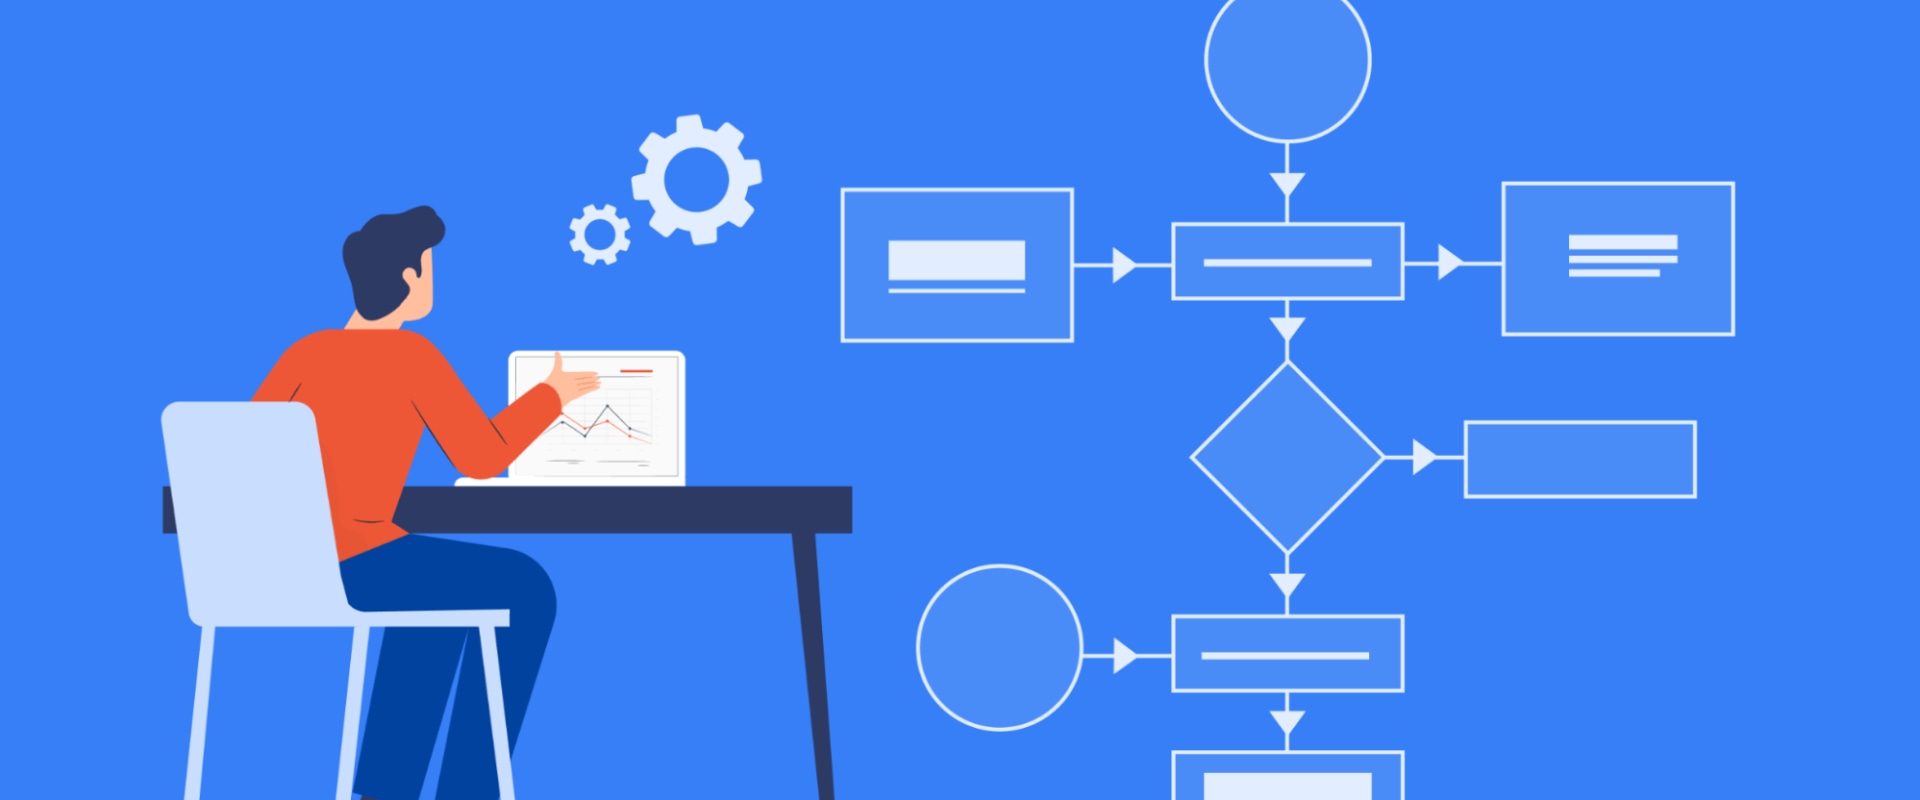 Automating Business Process Management (BPM) Workflows